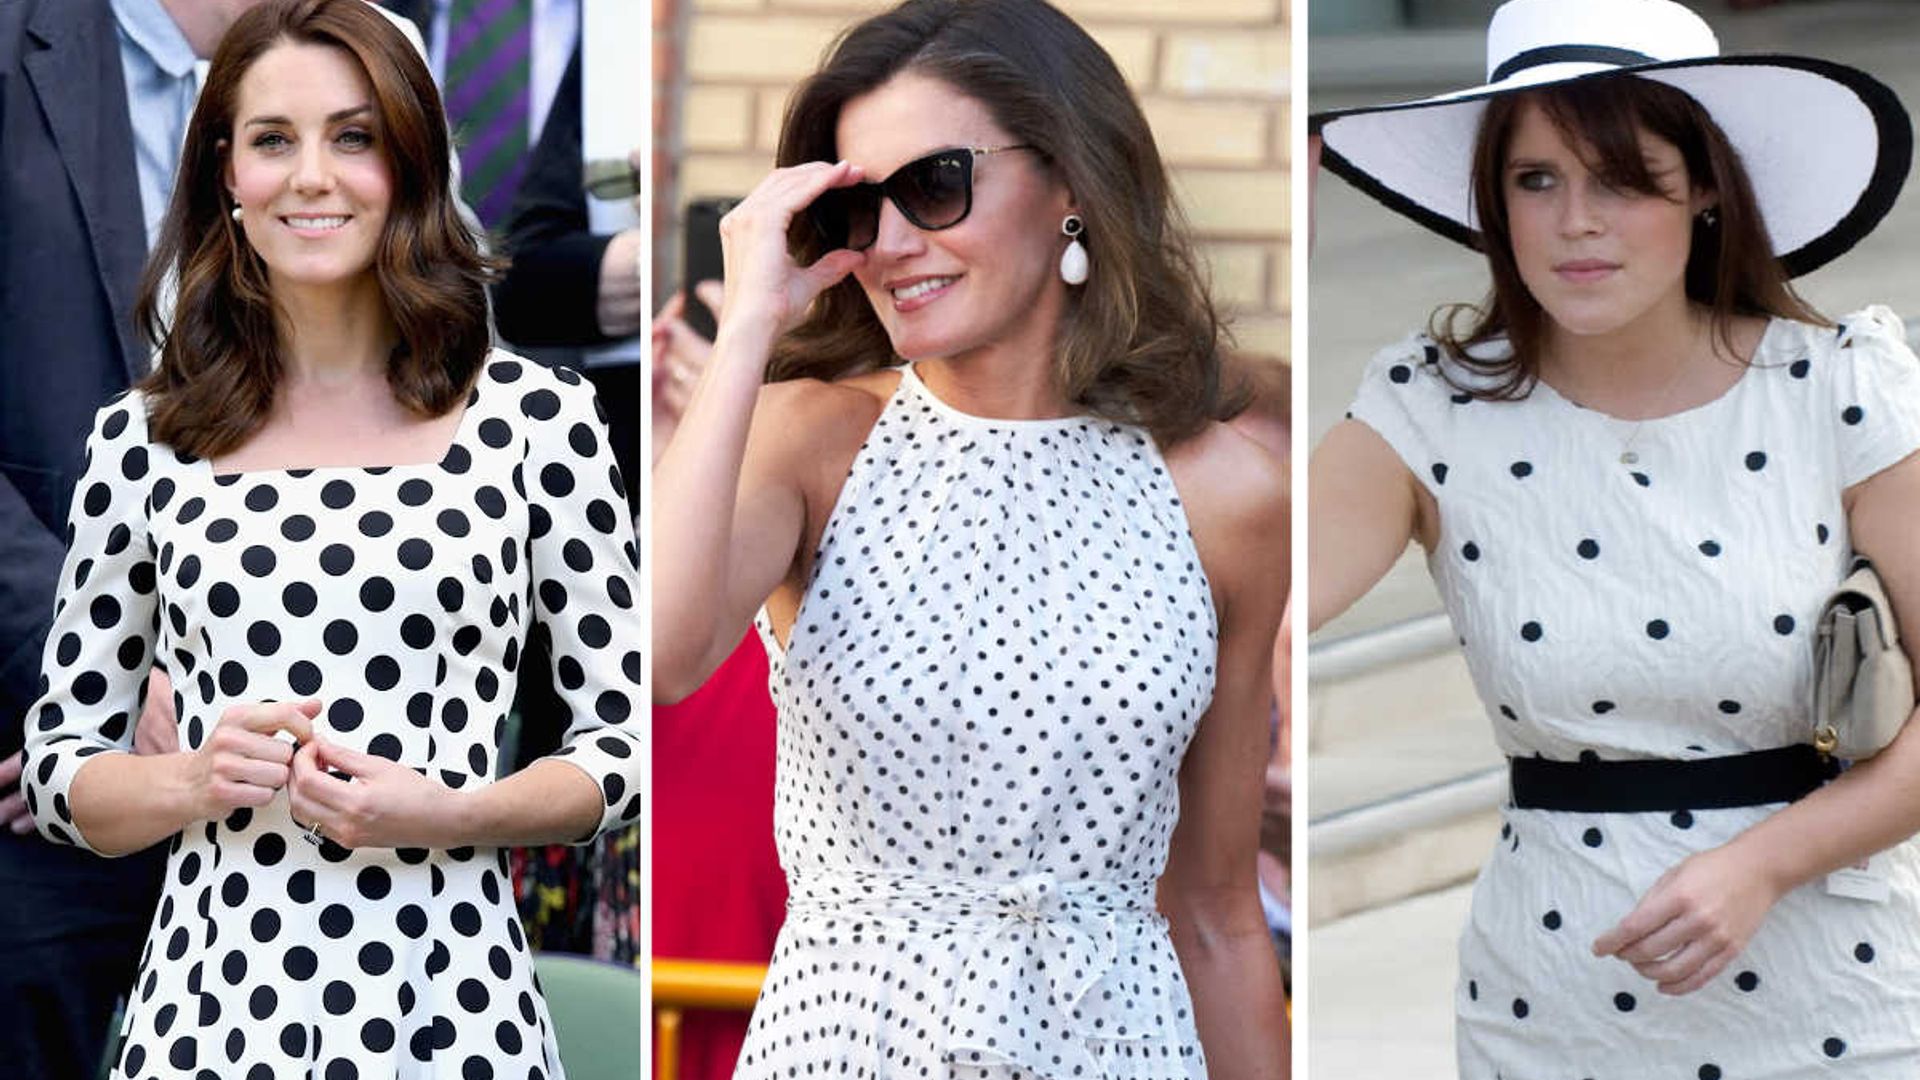 Kate Middleton and more royals are dotty for monochrome polka dot dresses – shop the trend